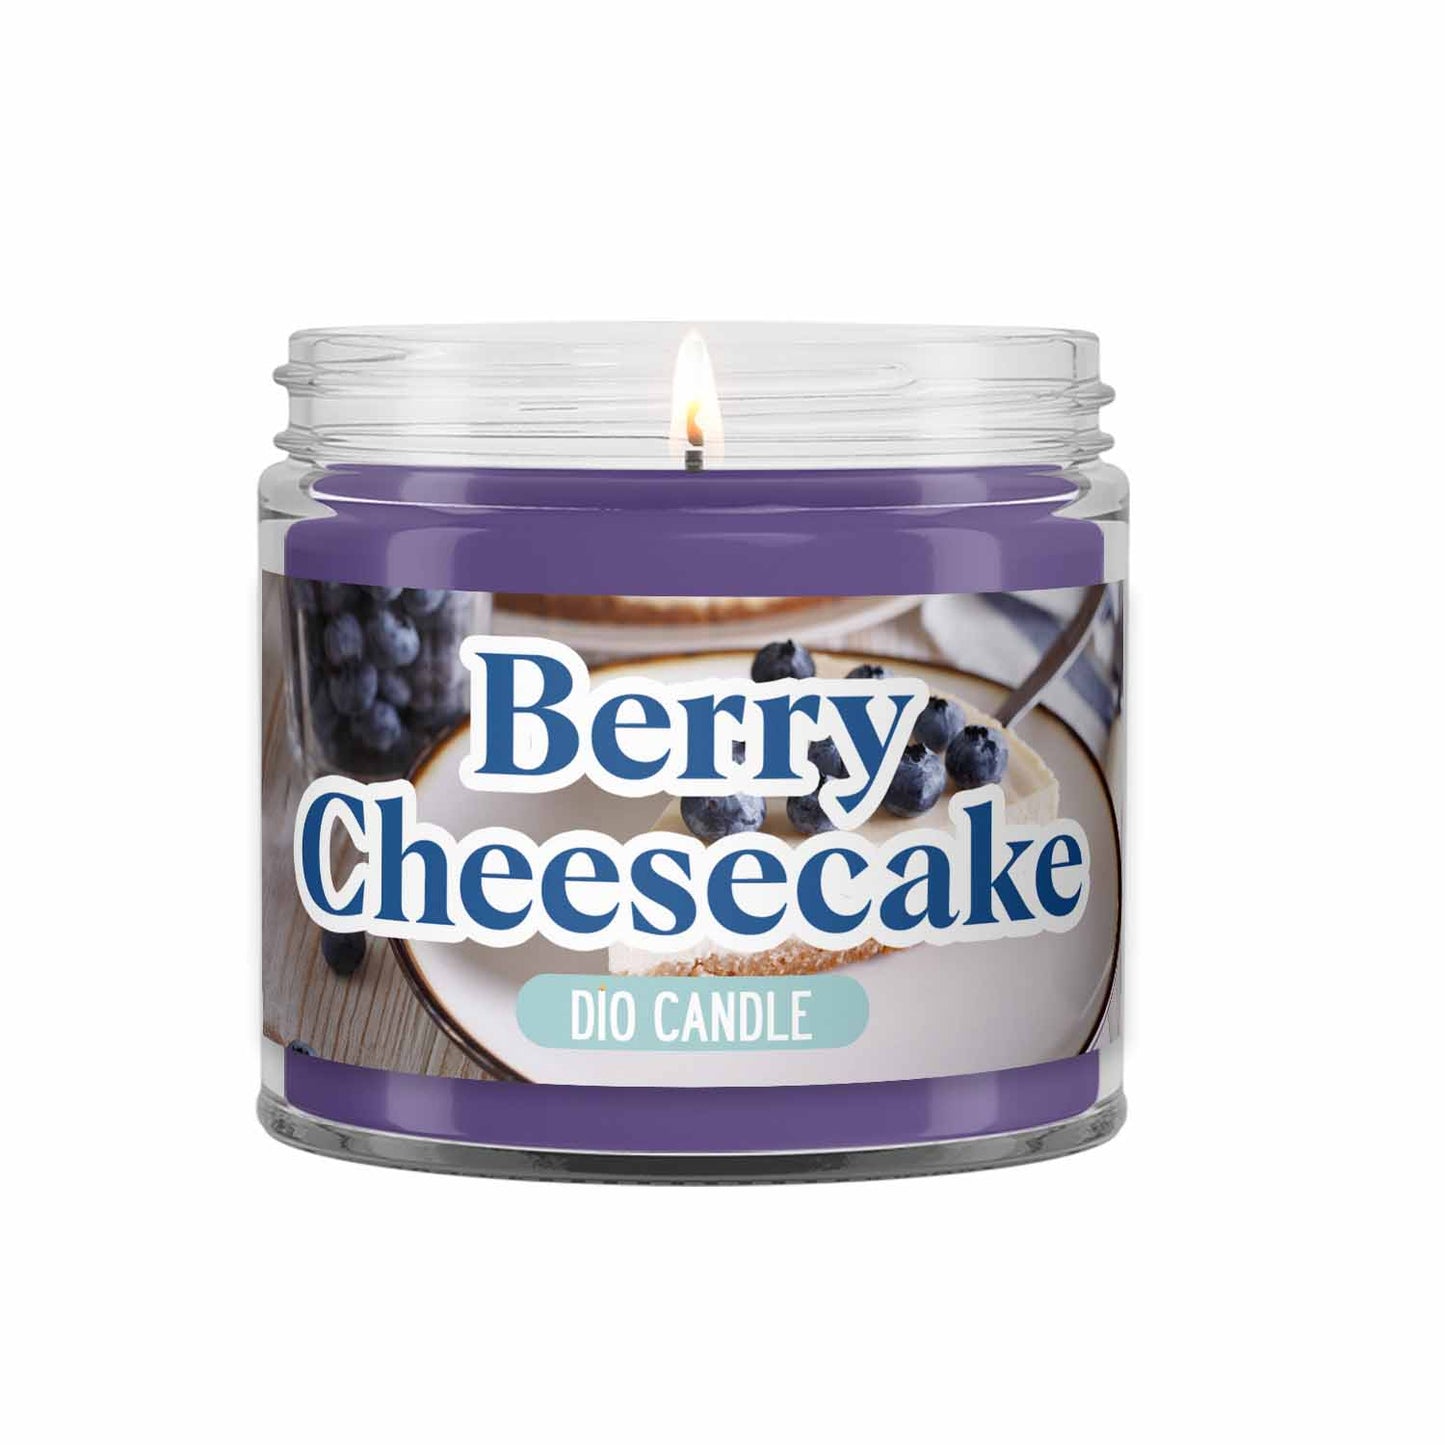 Berry Cheesecake Candle